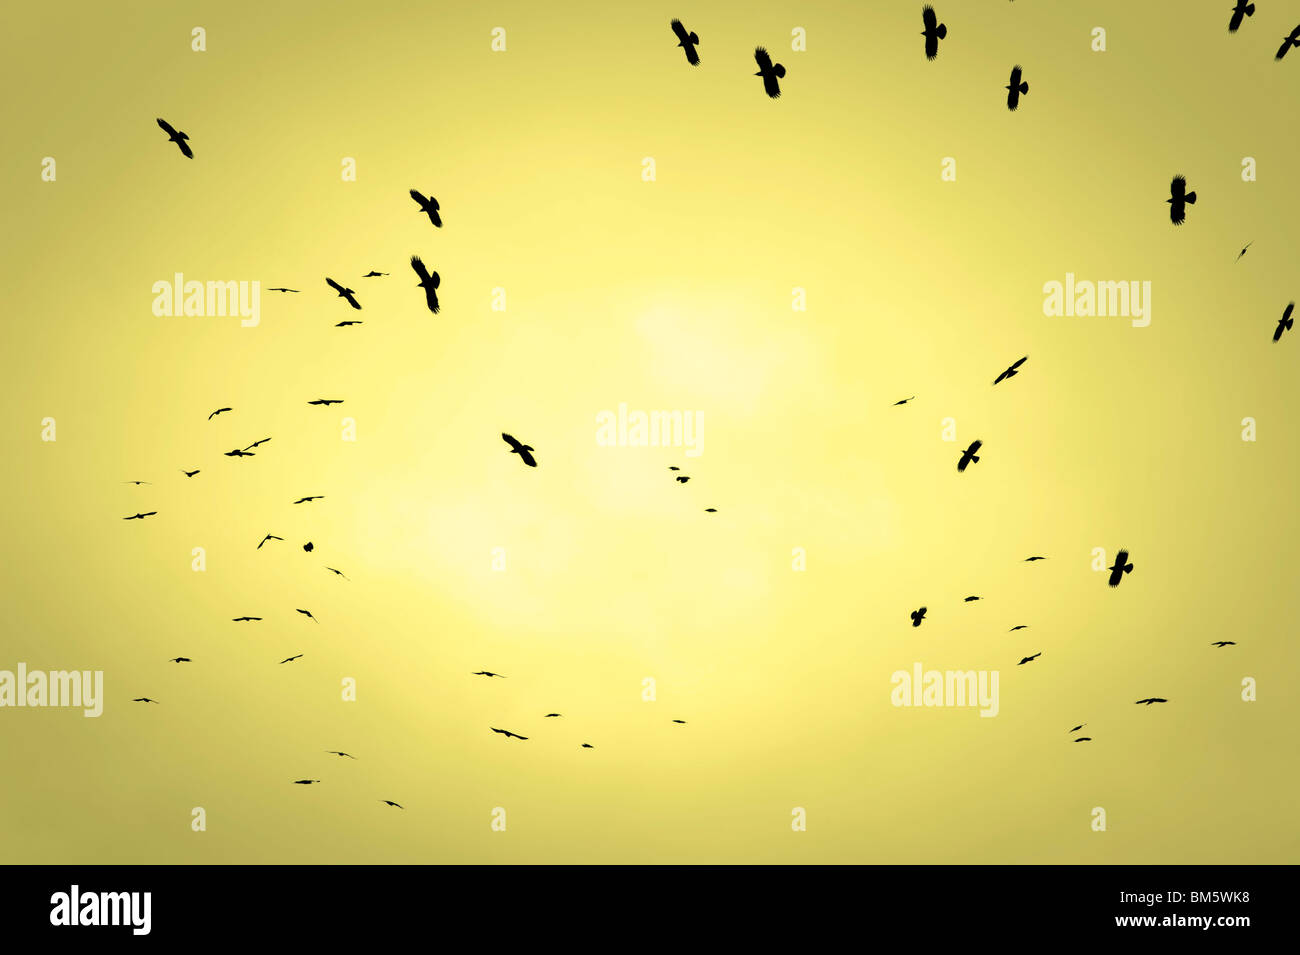 Many birds circling overhead silhouetted against a yellow sky Stock Photo